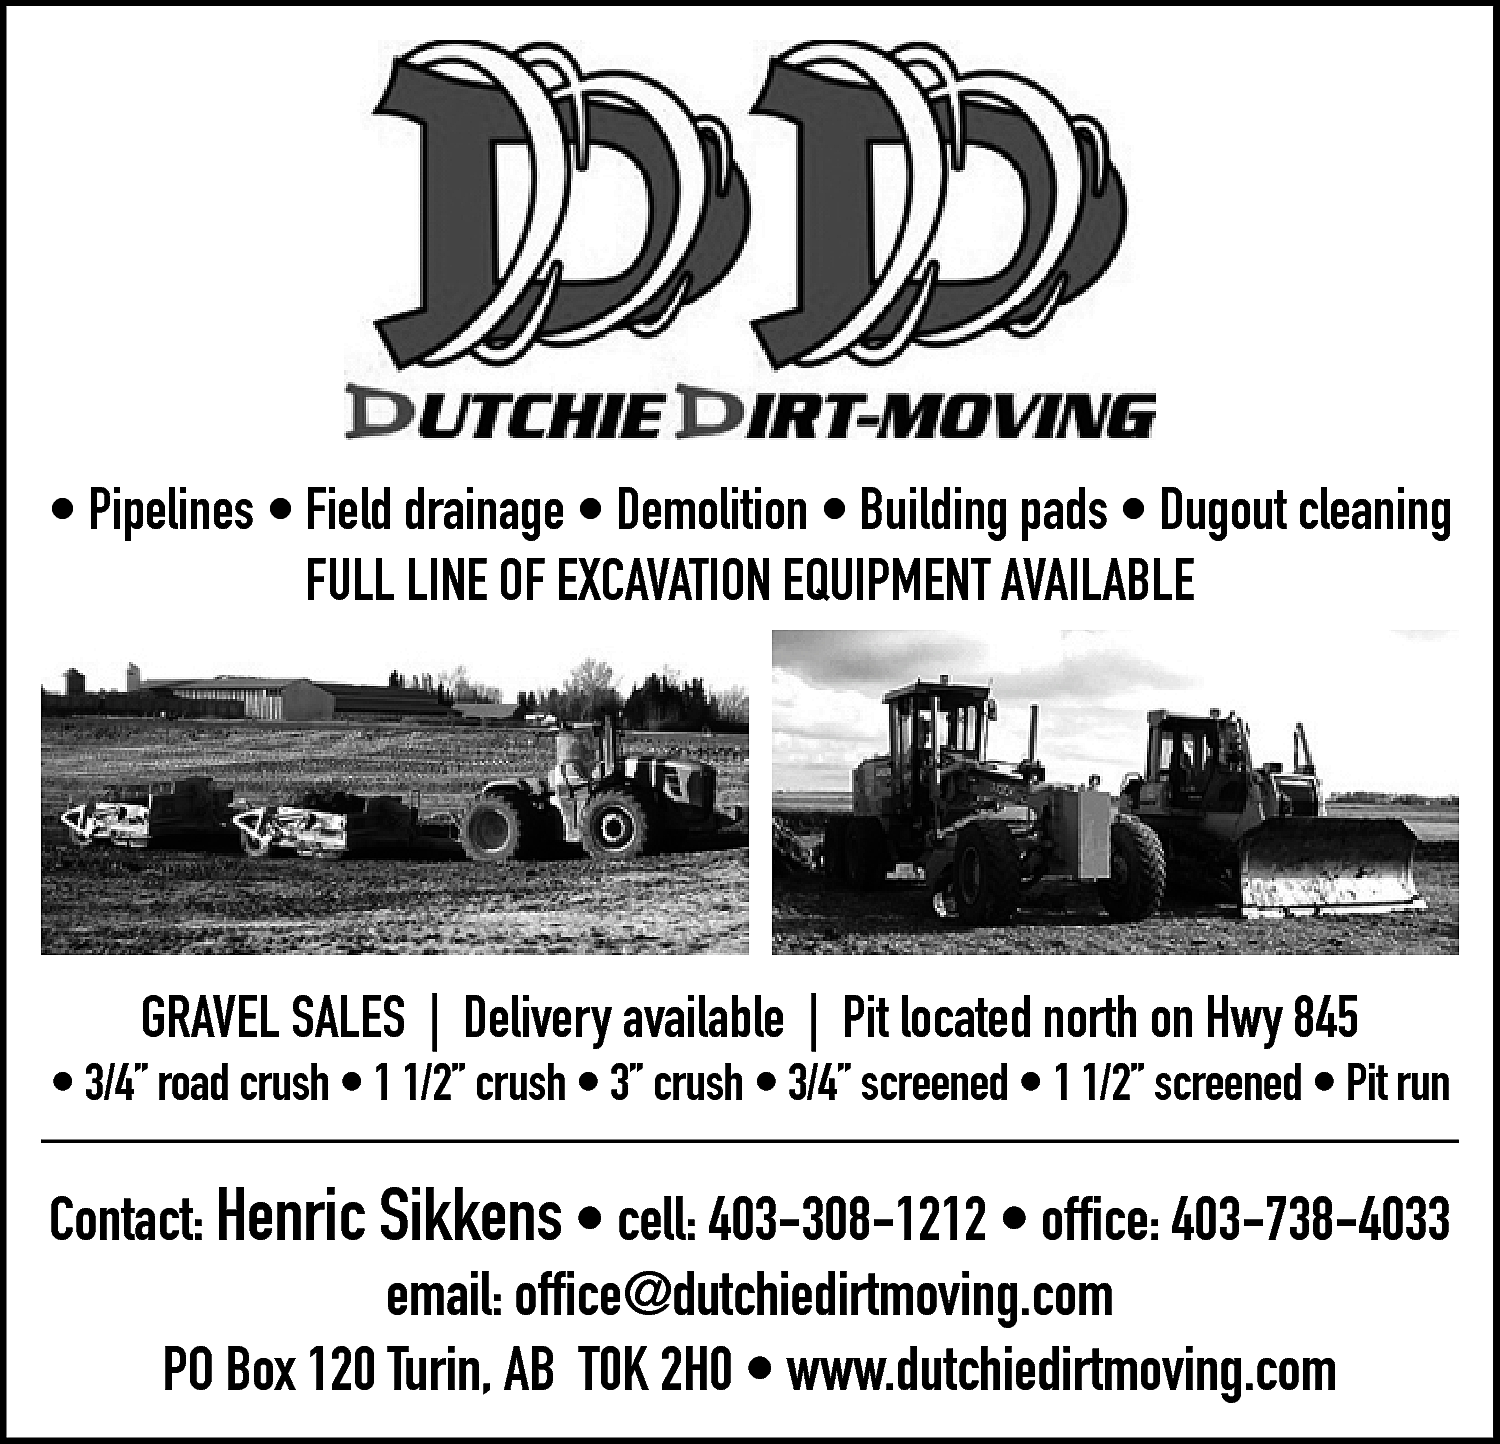 • Pipelines • Field drainage  • Pipelines • Field drainage • Demolition • Building pads • Dugout cleaning  FULL LINE OF EXCAVATION EQUIPMENT AVAILABLE    GRAVEL SALES | Delivery available | Pit located north on Hwy 845    • 3/4” road crush • 1 1/2” crush • 3” crush • 3/4” screened • 1 1/2” screened • Pit run    Contact: Henric Sikkens • cell: 403-308-1212 • office: 403-738-4033  email: office@dutchiedirtmoving.com  PO Box 120 Turin, AB T0K 2H0 • www.dutchiedirtmoving.com    